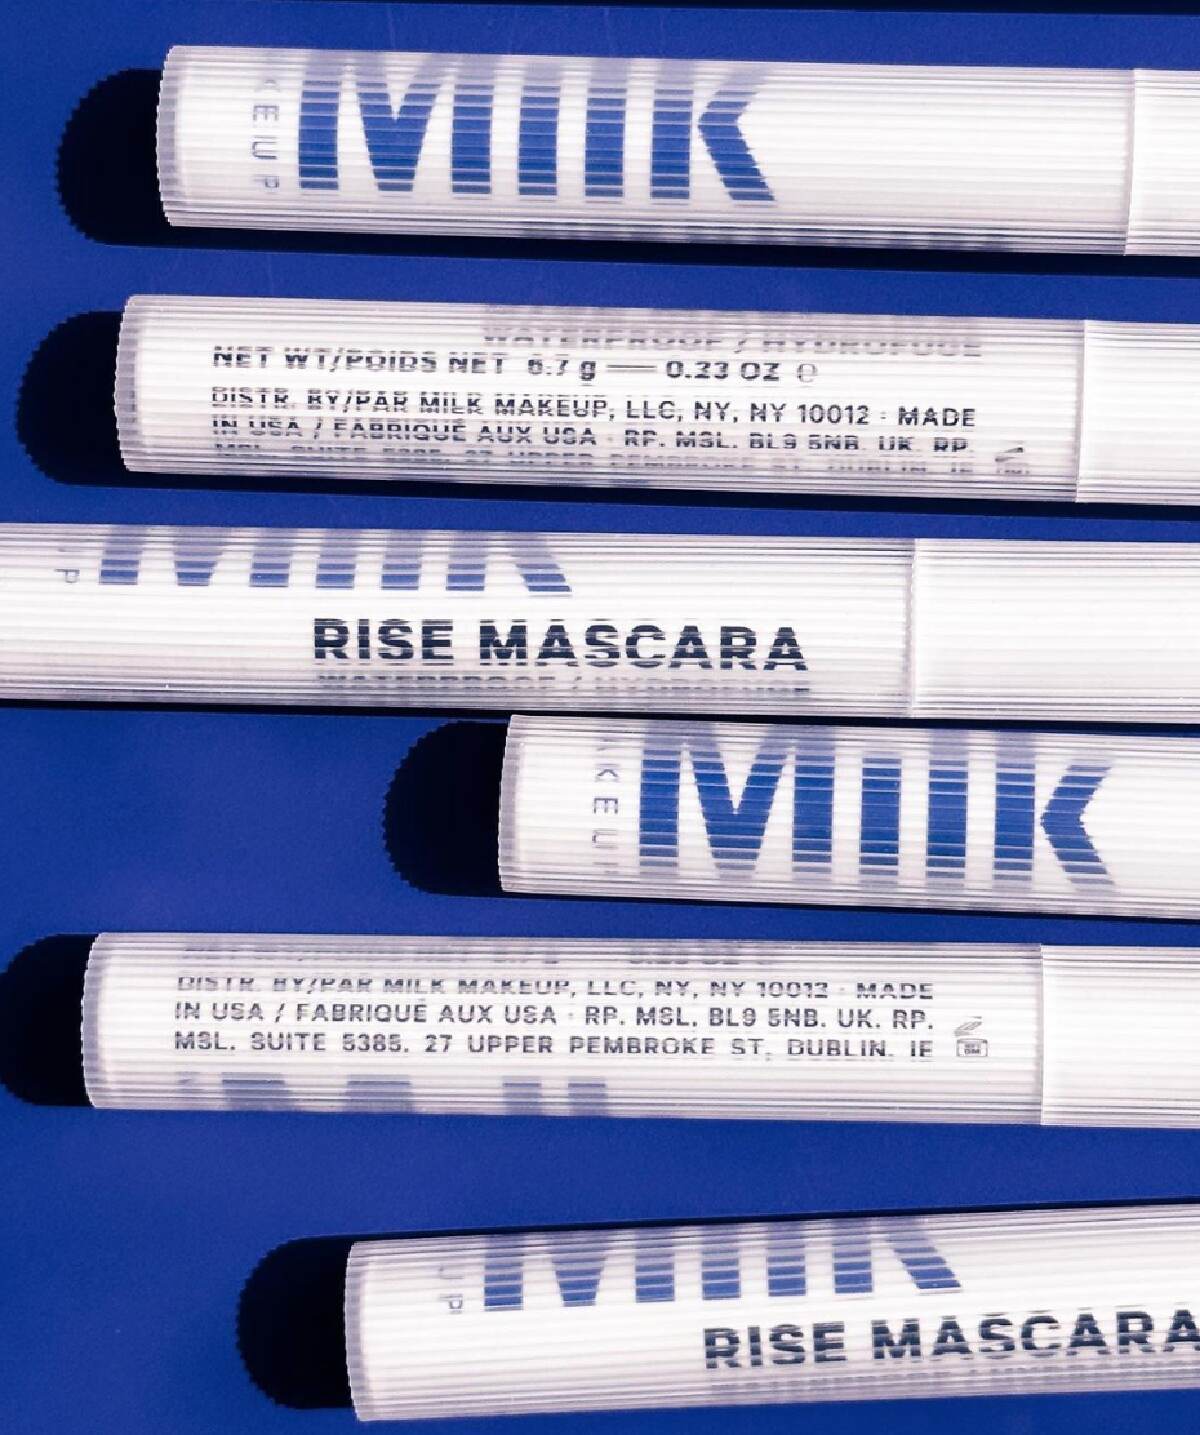 White Milk Makeup mascara tubes with blue writing against a blue background. 